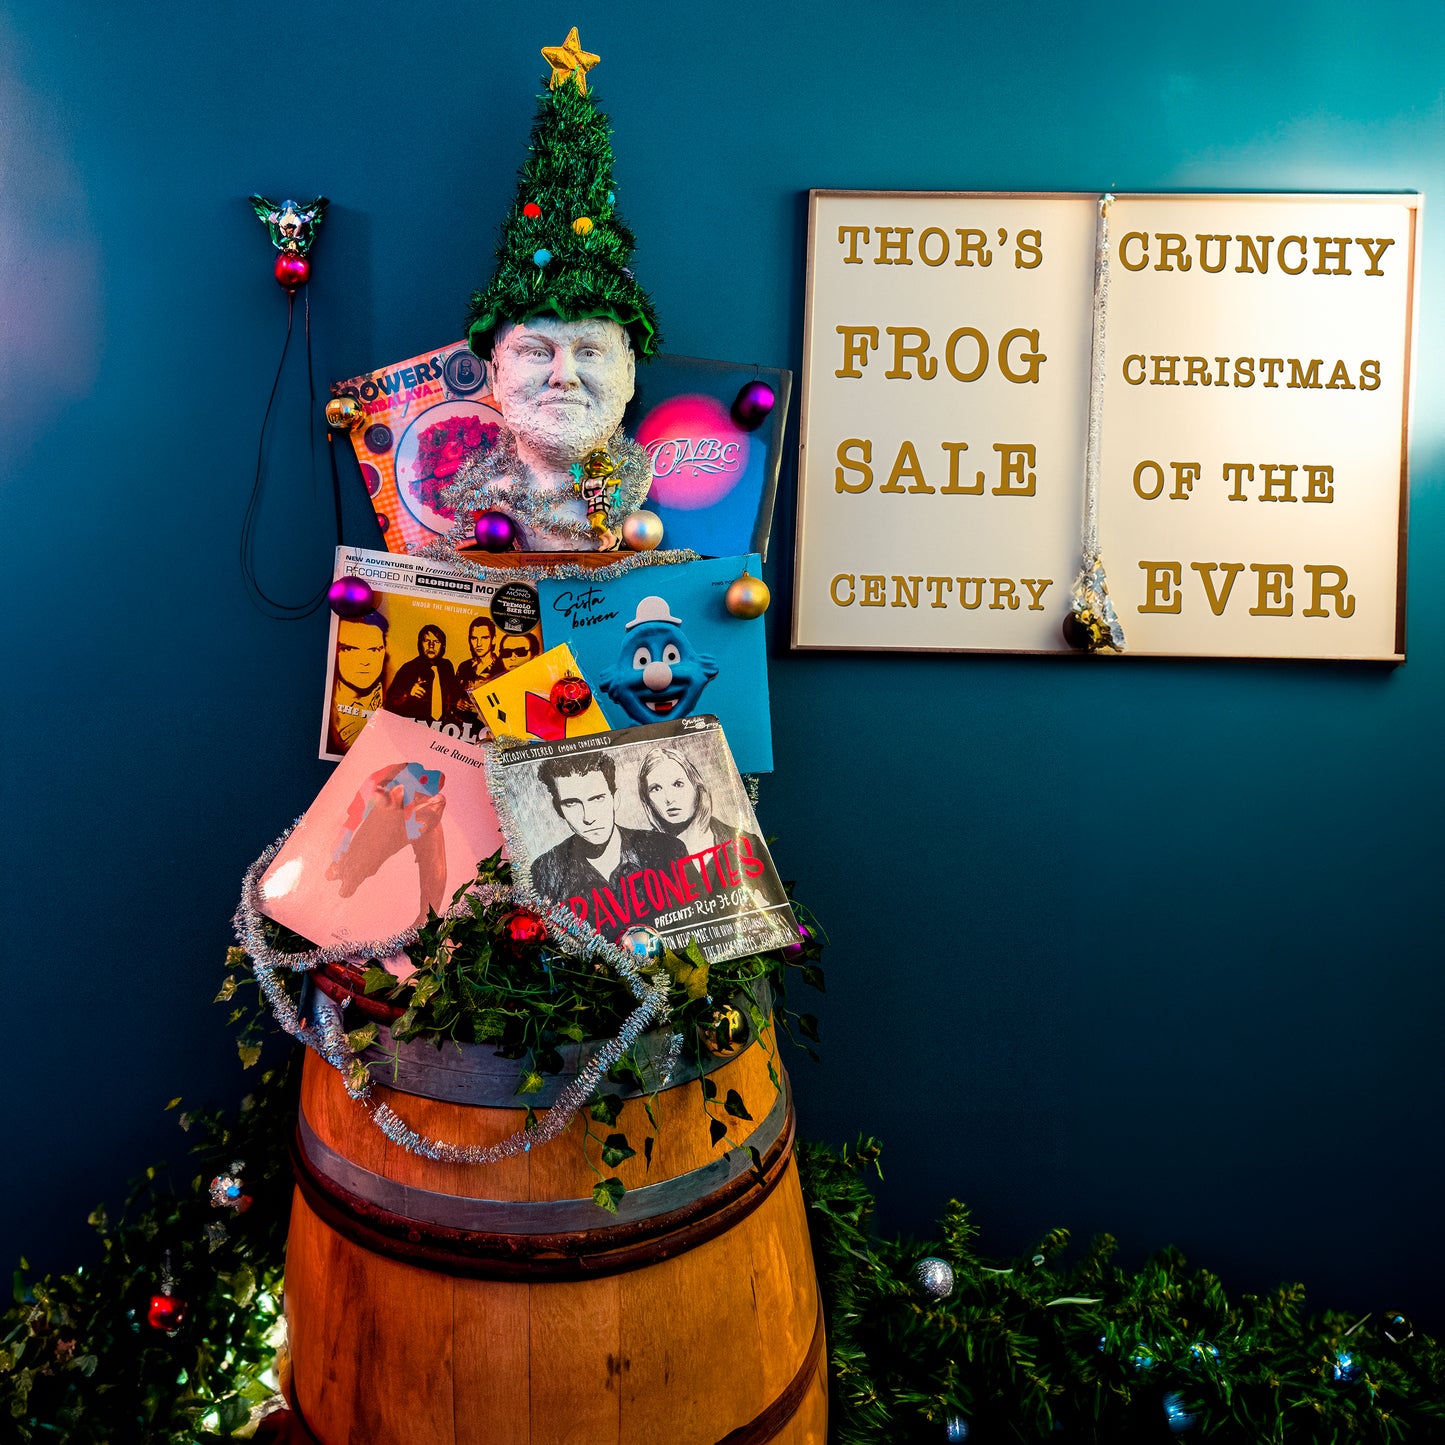 Thor´s Crunchy Frog Christmas Bundle offer of the Century